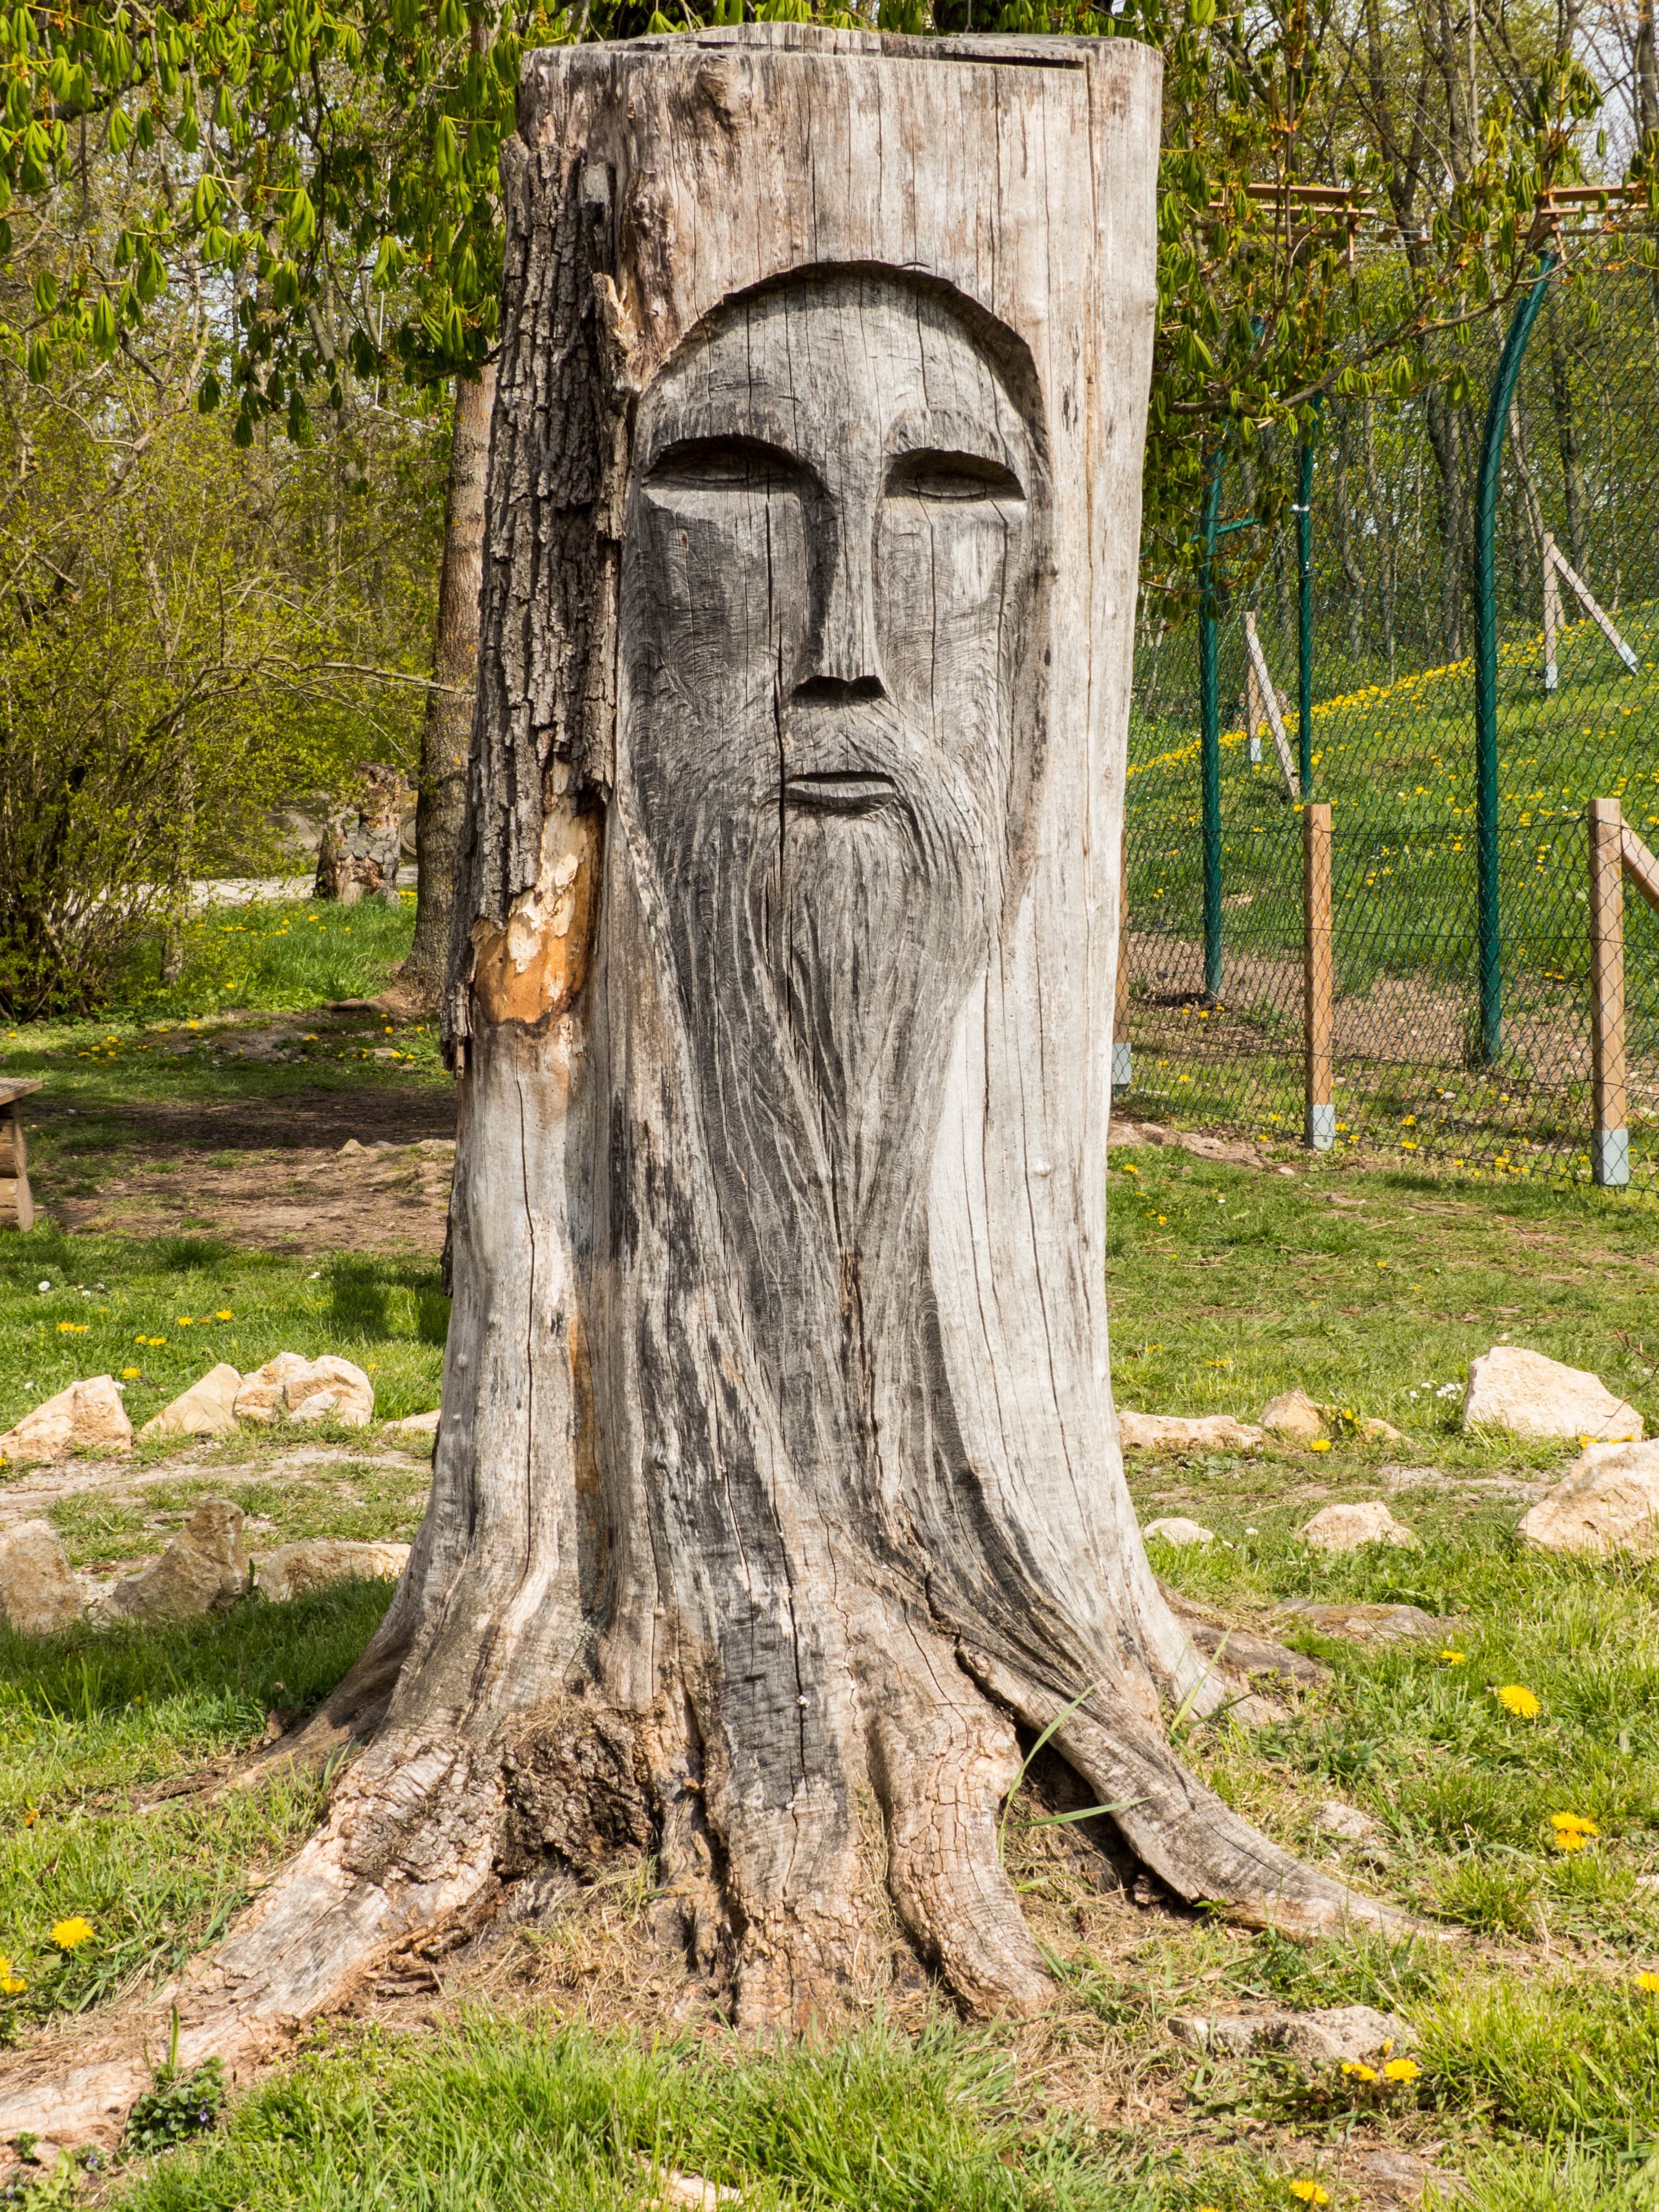 man's face carved wood trunk